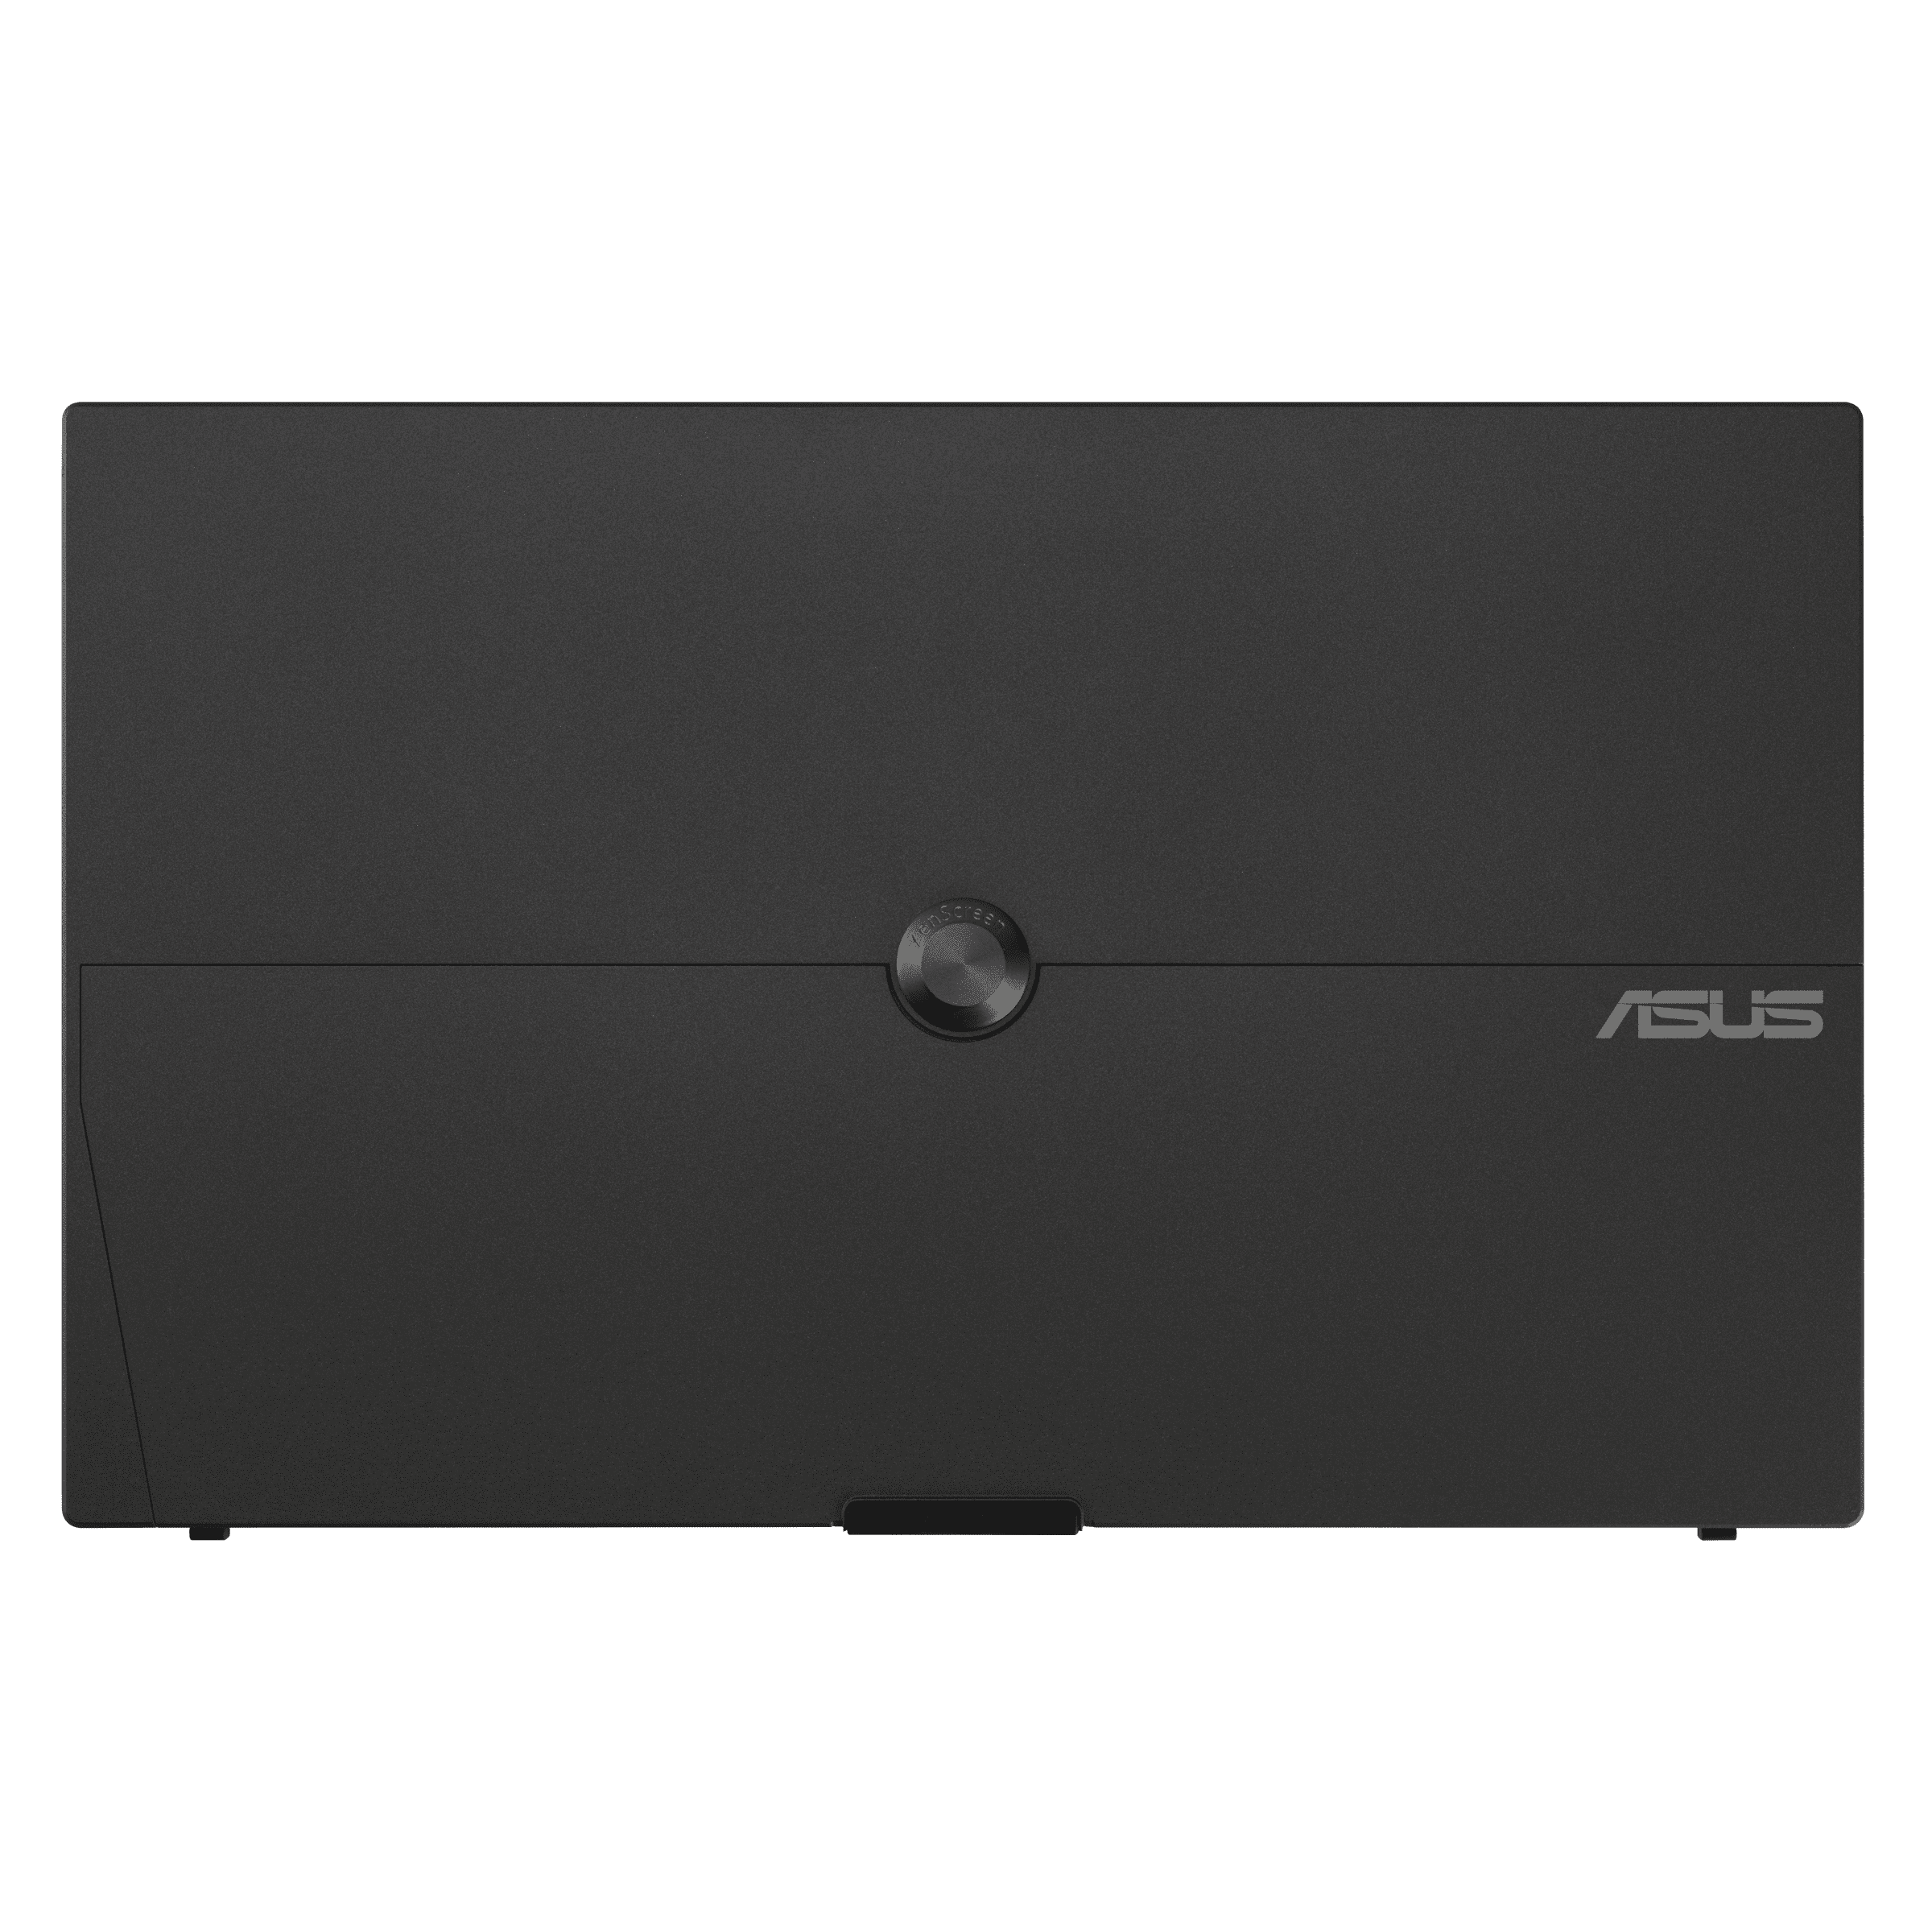 Review: ASUS ZenScreen Go MB16AWP Portable Wireless Monitor